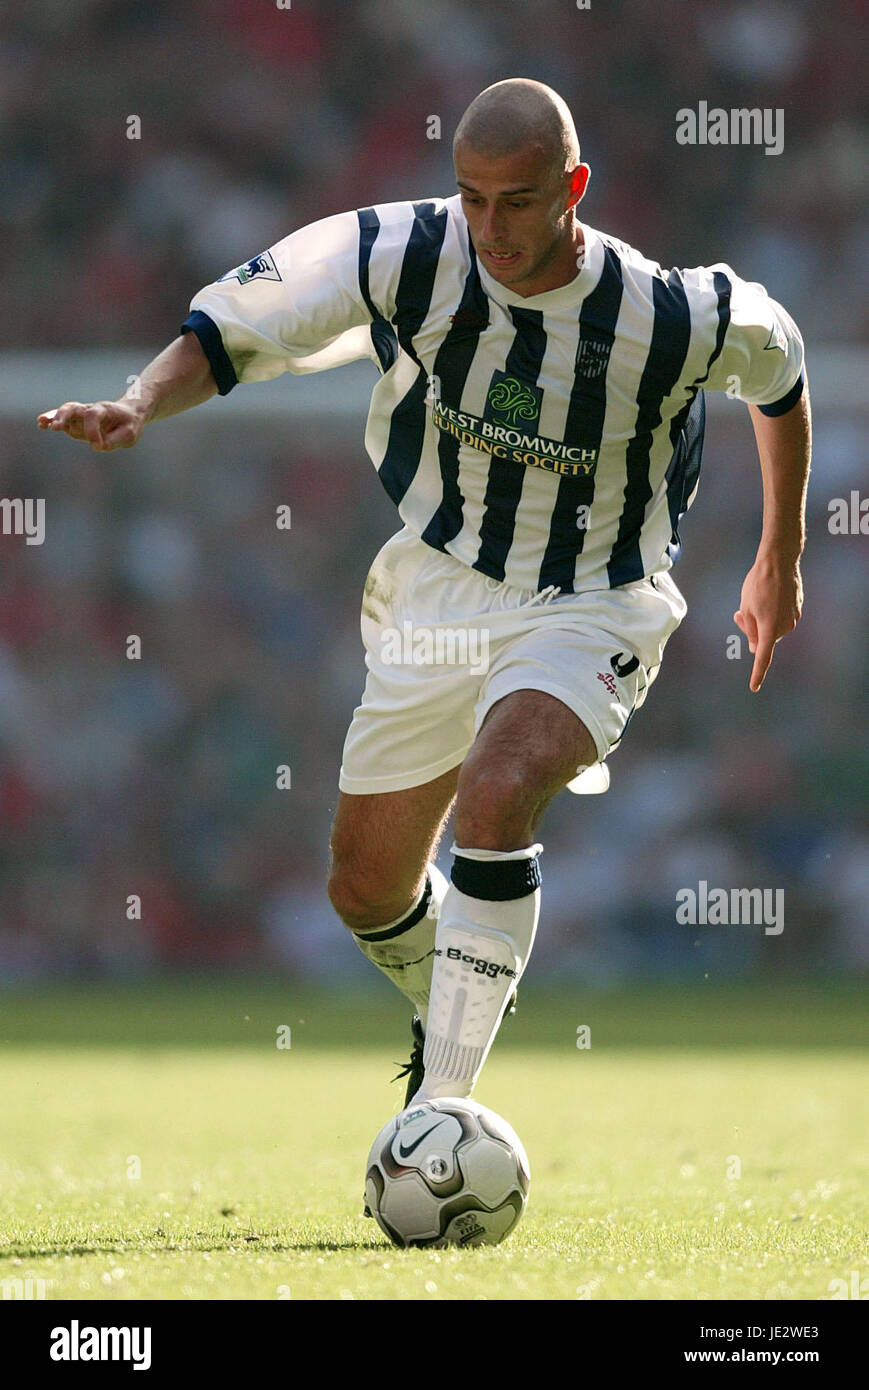 NEIL CLEMENT WEST BROMWICH ALBION FC ANFIELD LIVERPOOL 21 September 2002 Stock Photo